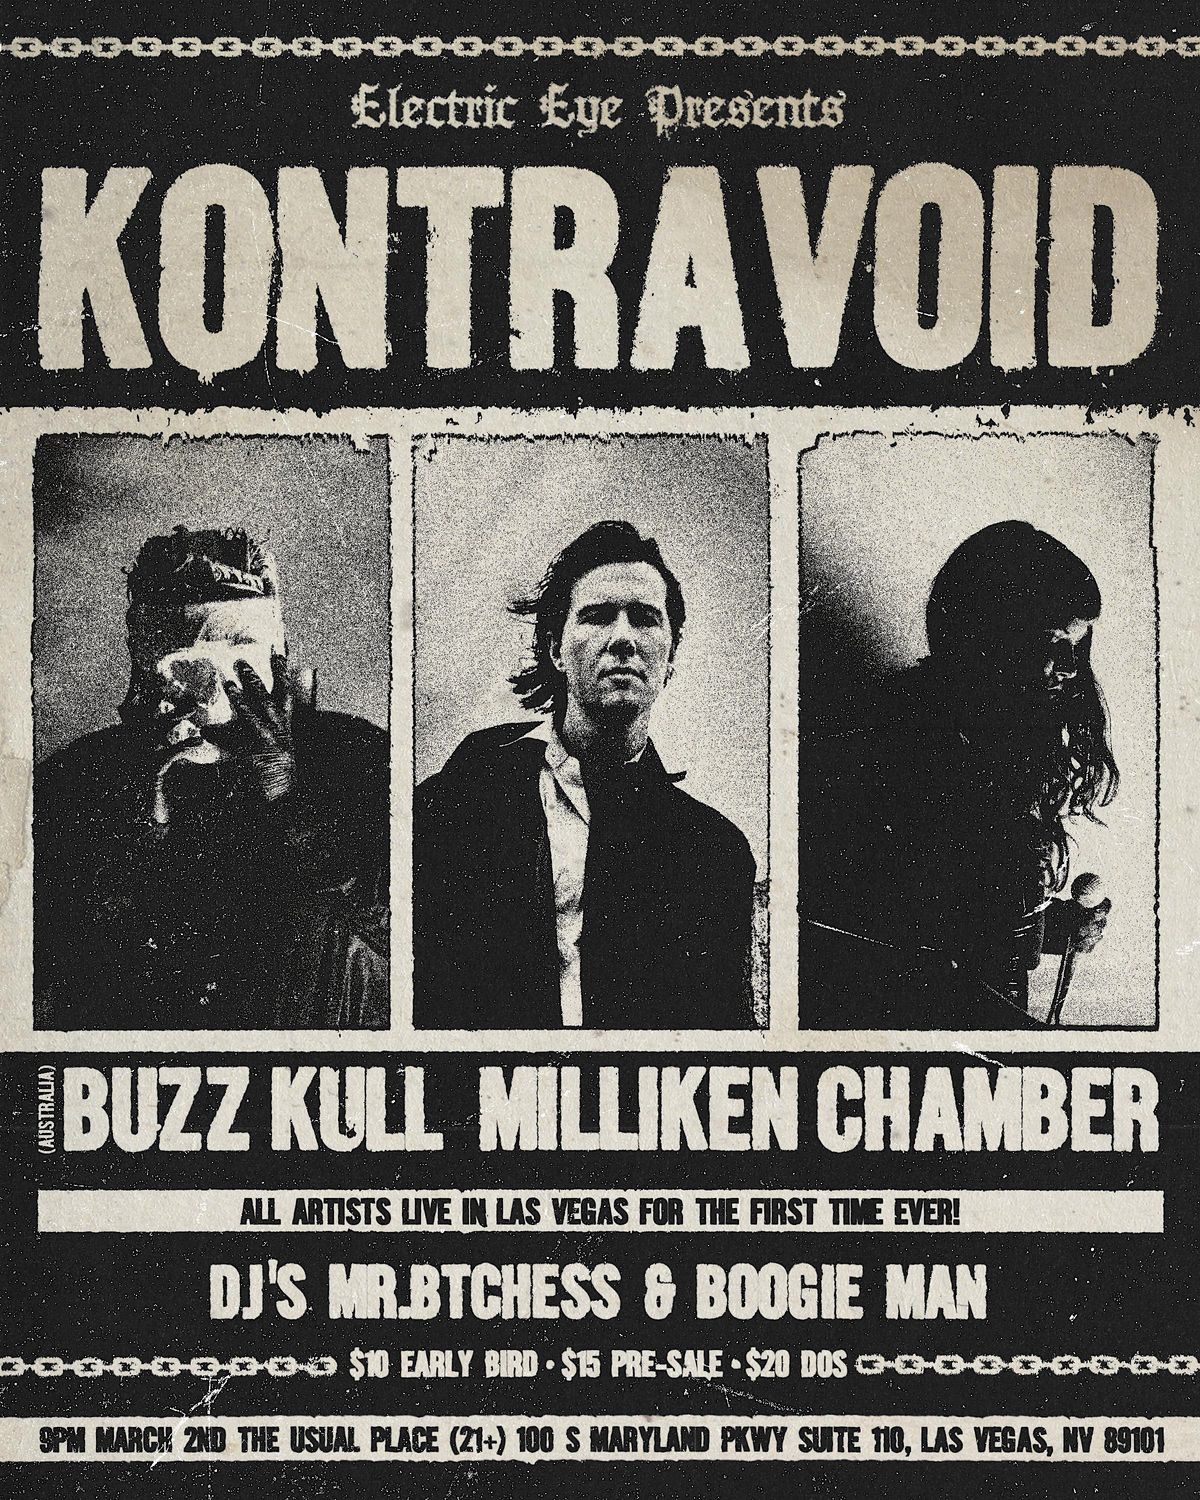 Kontravoid, Buzz Kull & Milliken Chamber at the Usual Place